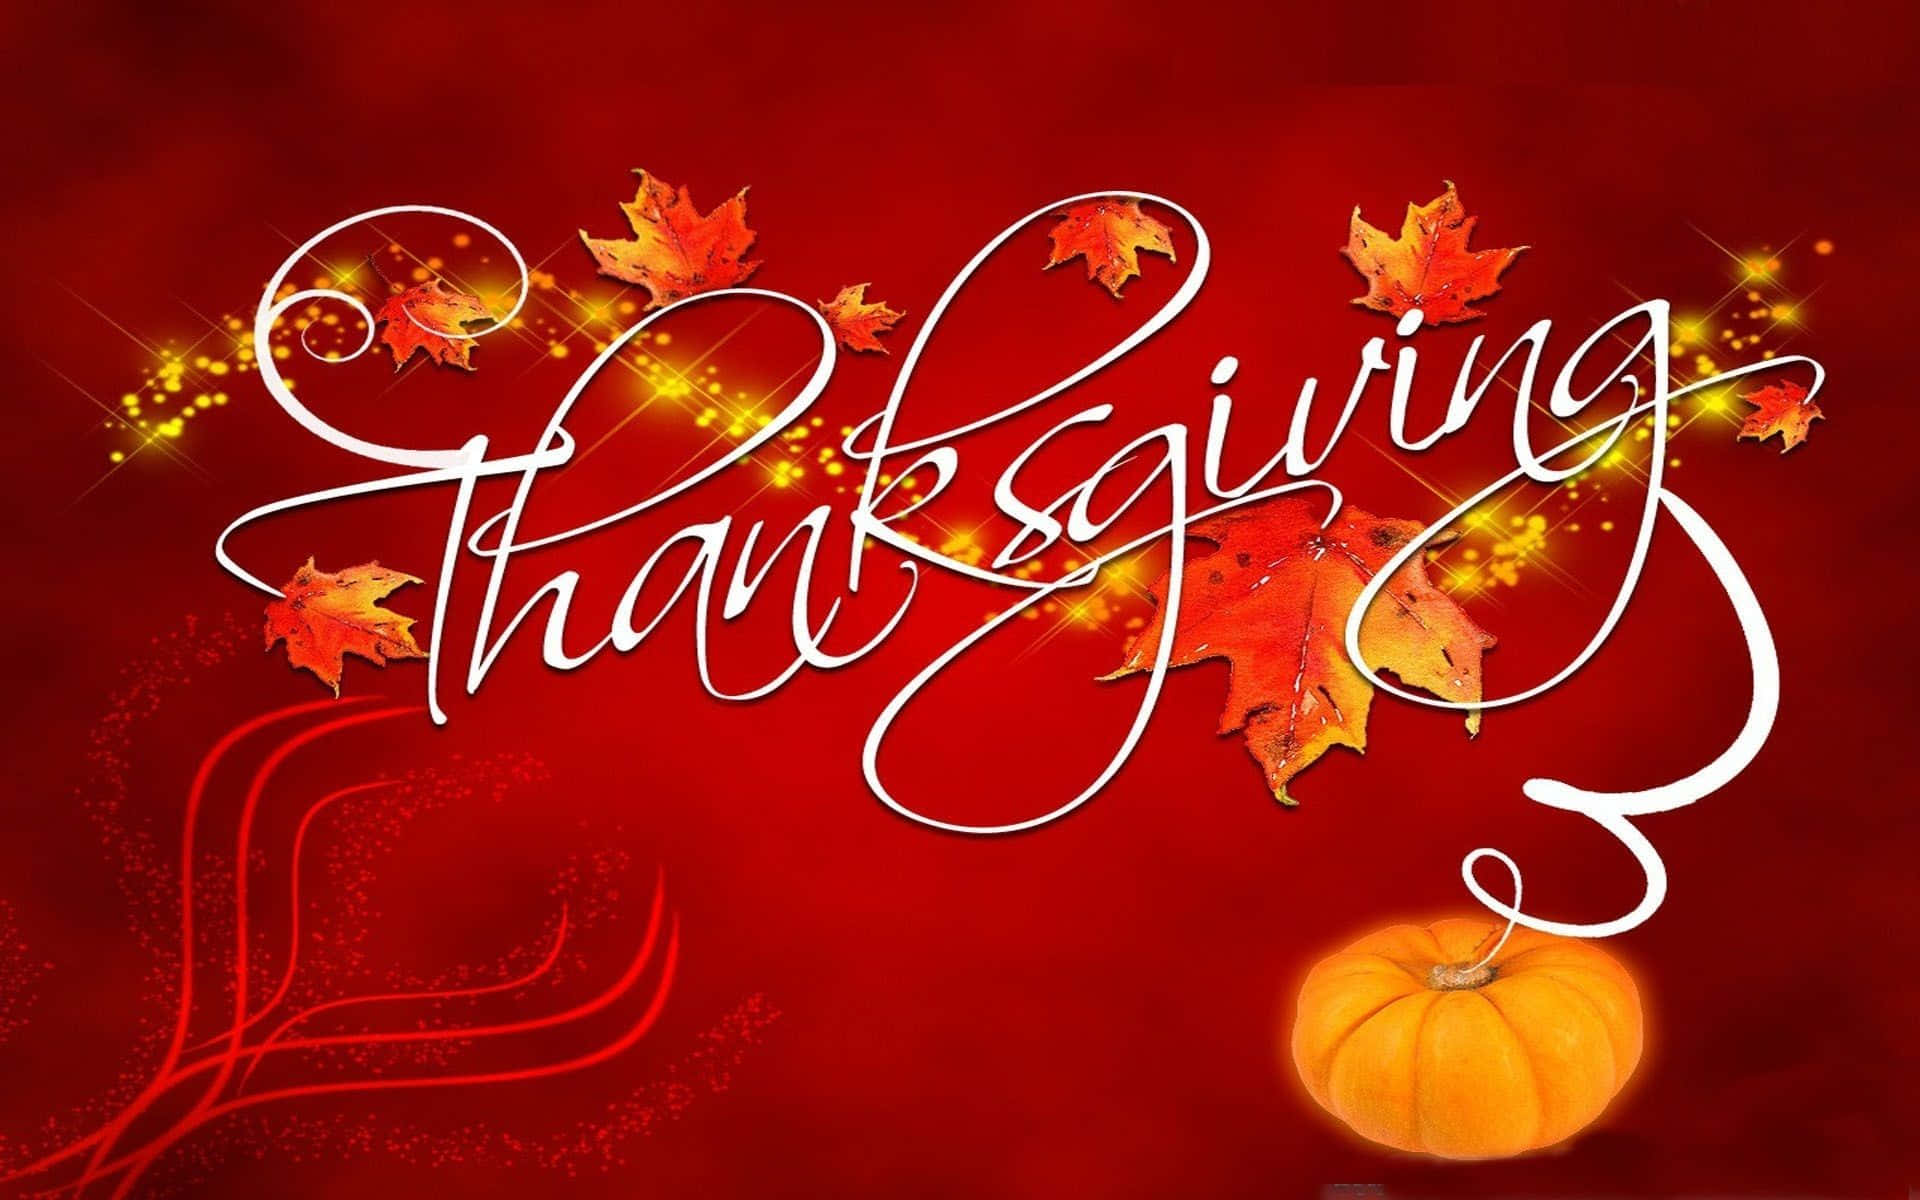 Celebrate this Year’s Thanksgiving in Style! Wallpaper